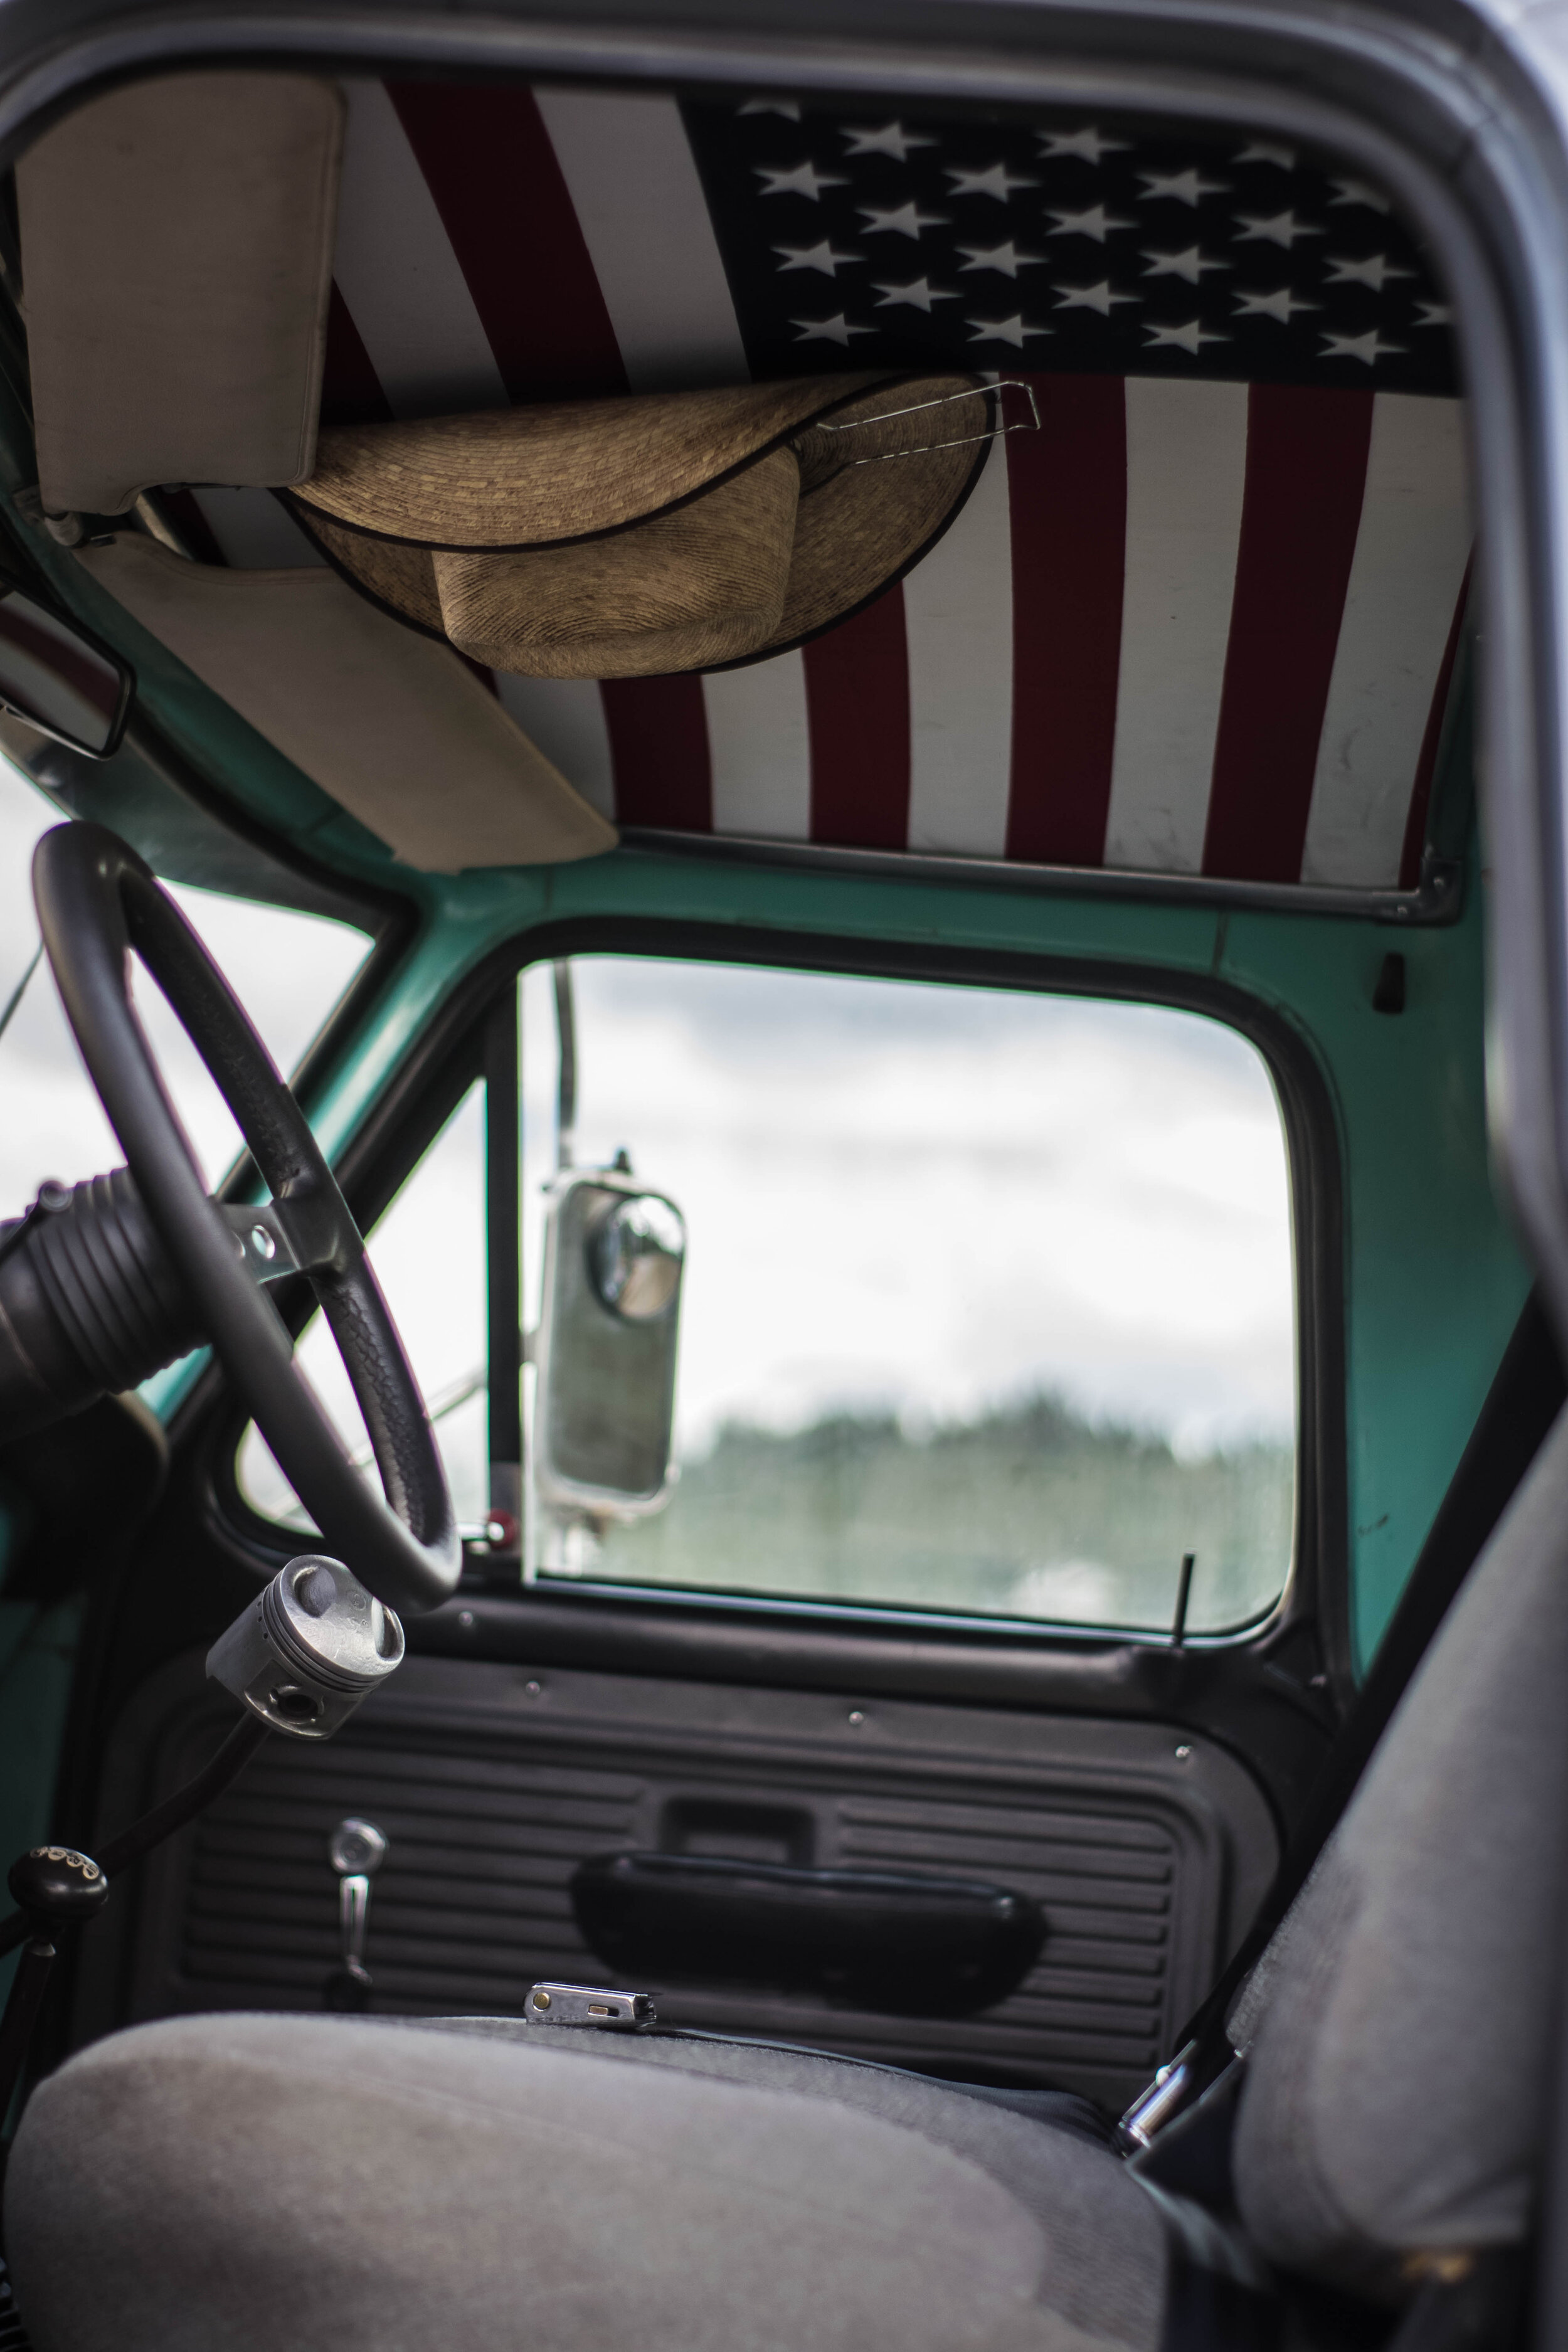  Some of my signature touches include custom interior finishes, like one off door panels and headliners. Snuggled up next to old glory is one of the two things every farm truck needs, a holder for your cowboy hat.  